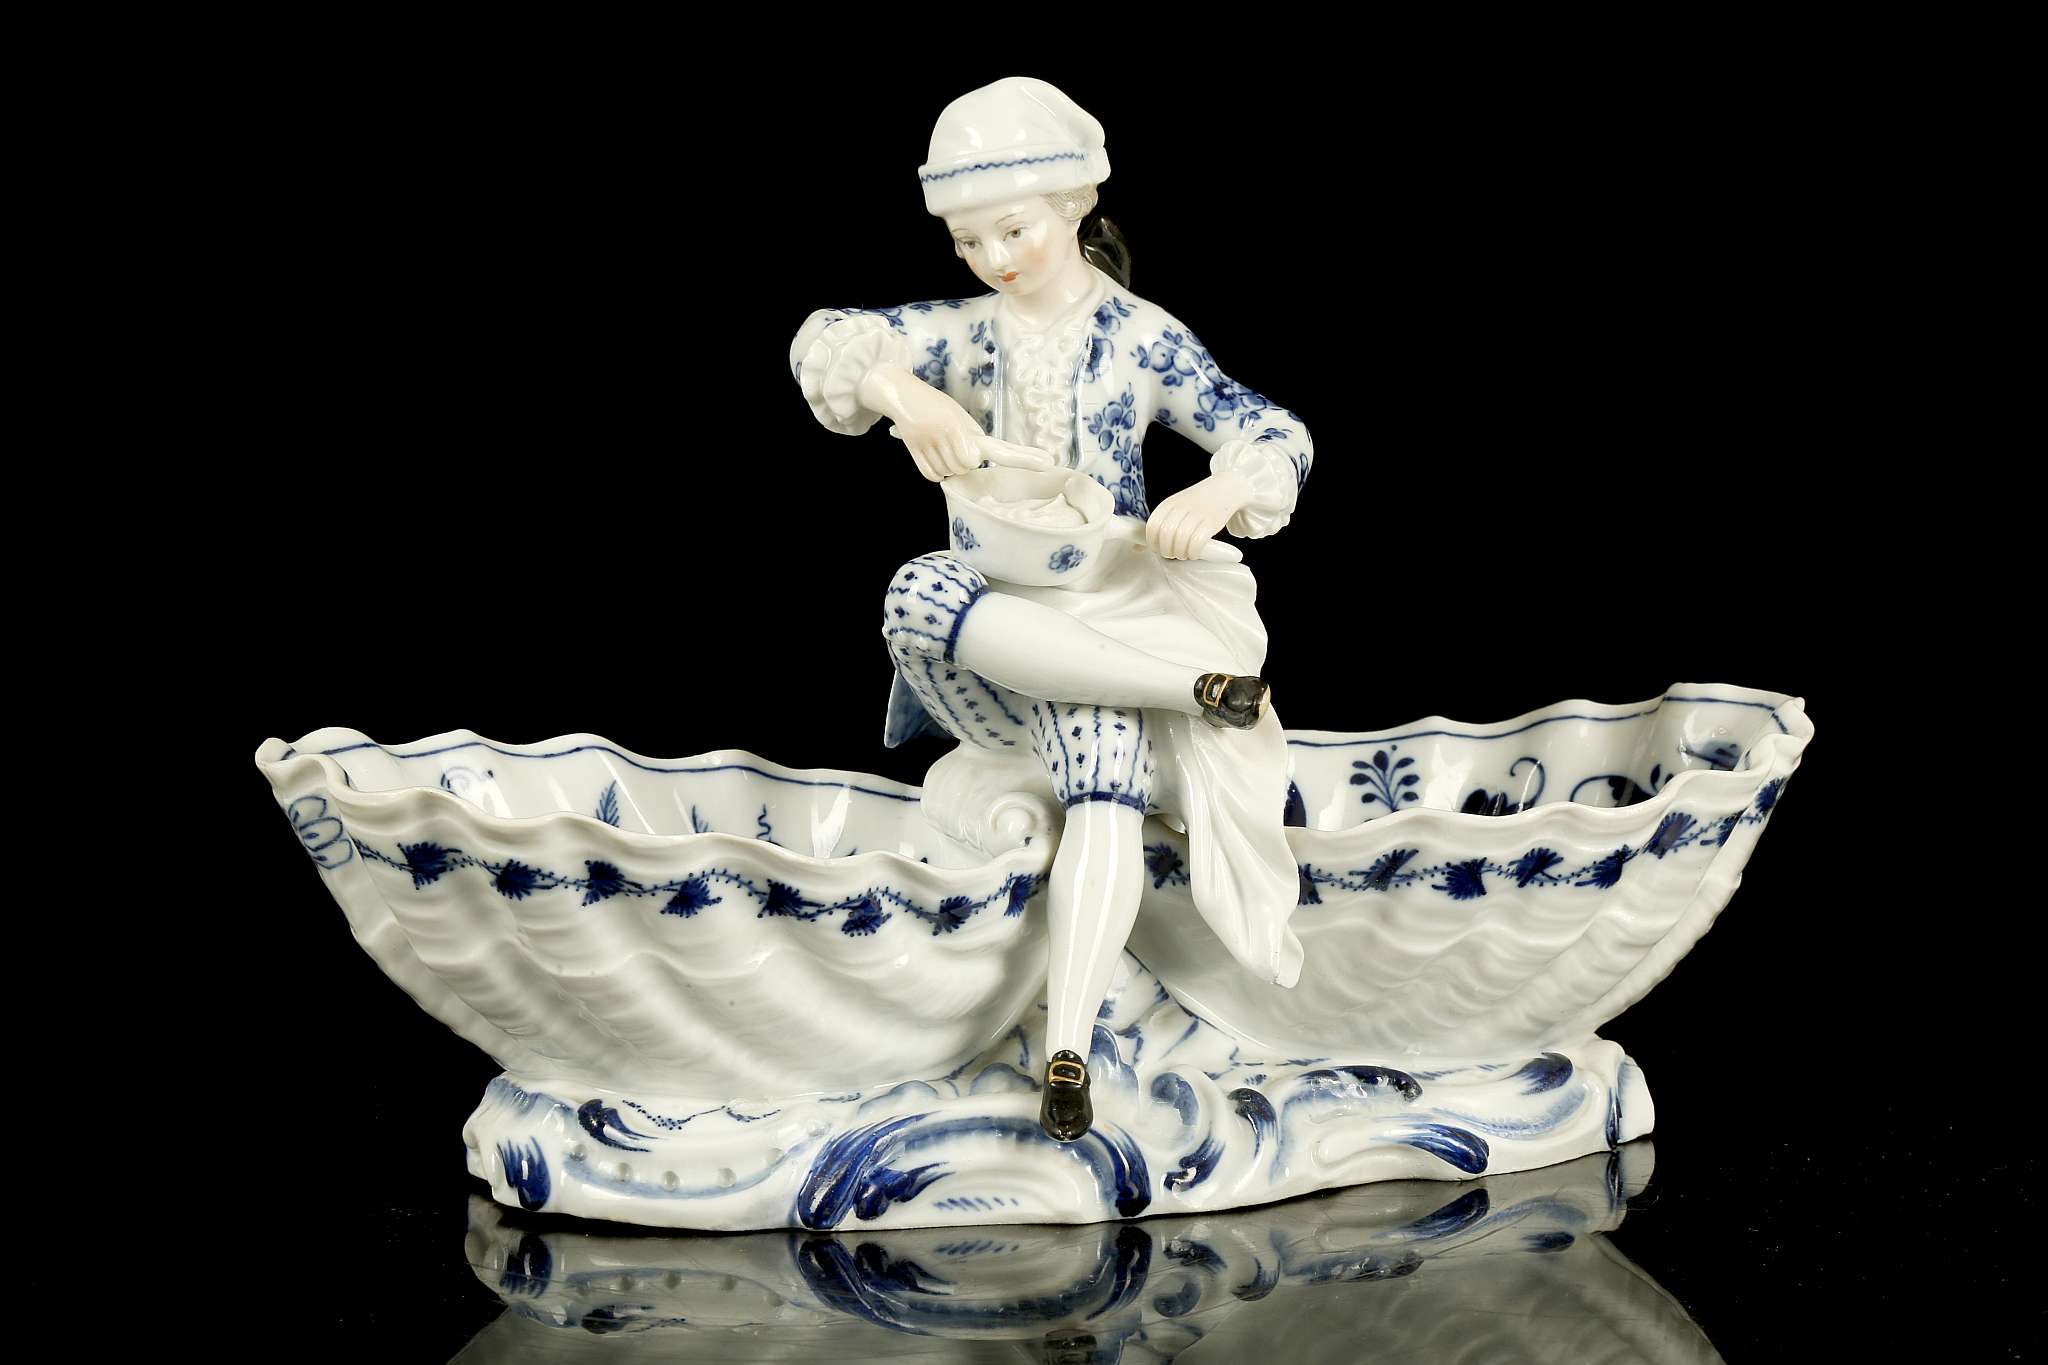 A MEISSEN PORCELAIN FIGURAL SWEETMEAT DISH, late 19th century, modelled as a young cook wearing a